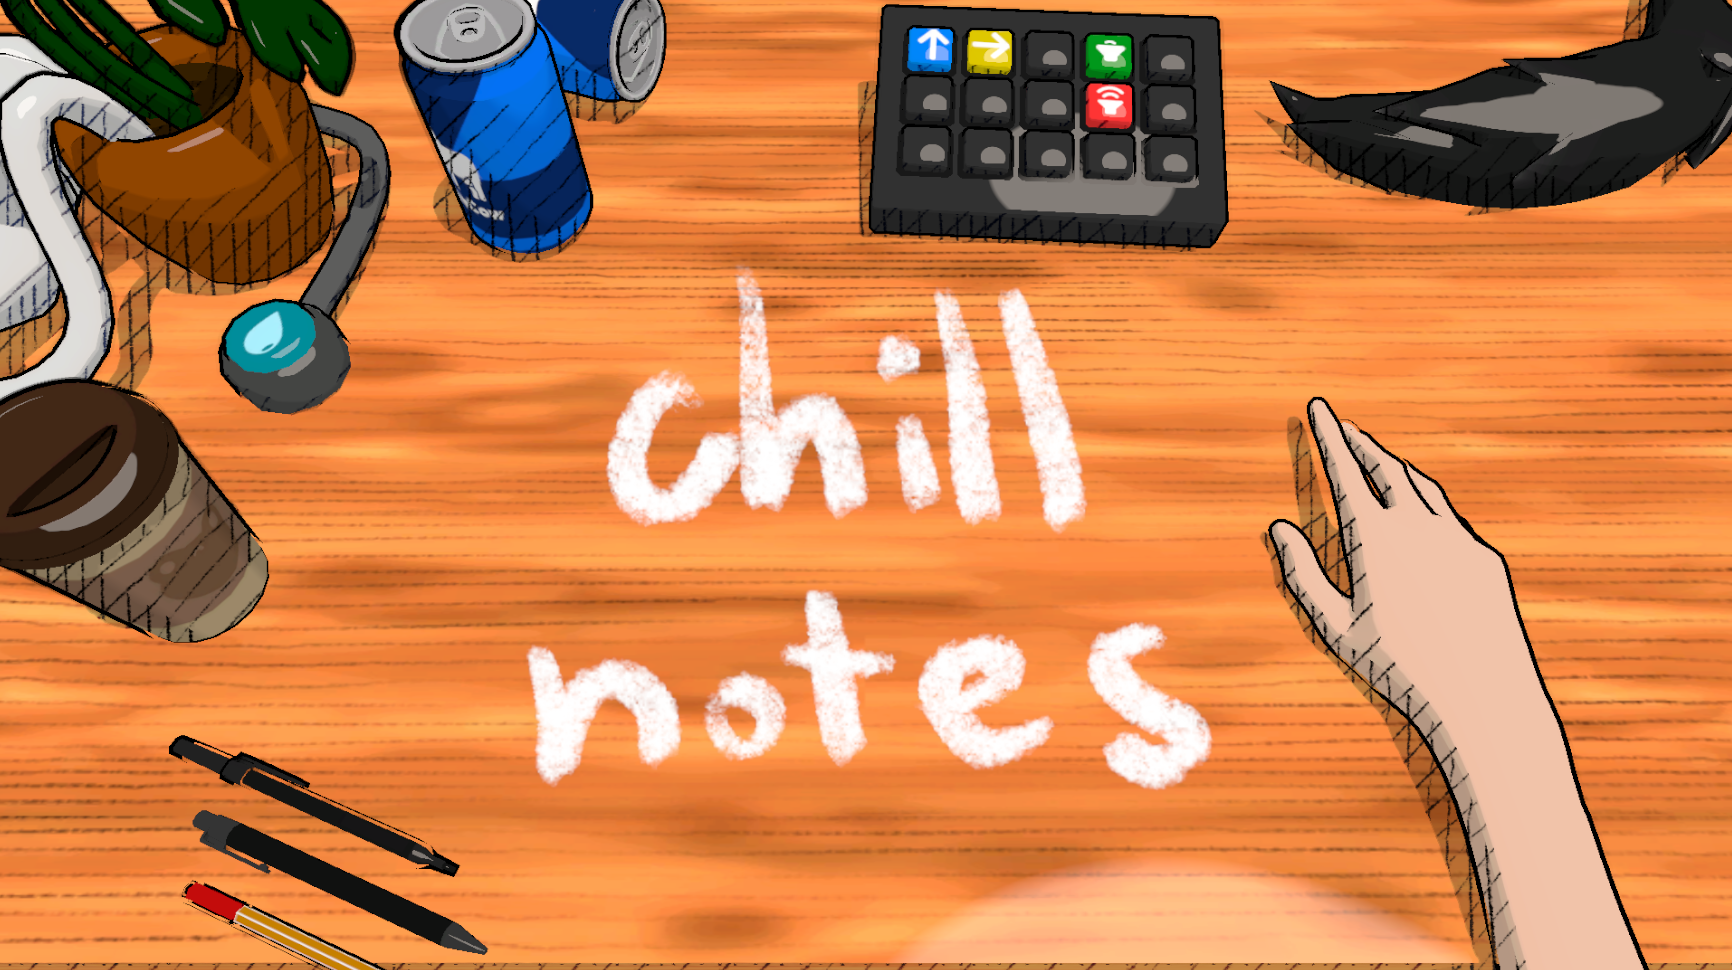 Chill Notes